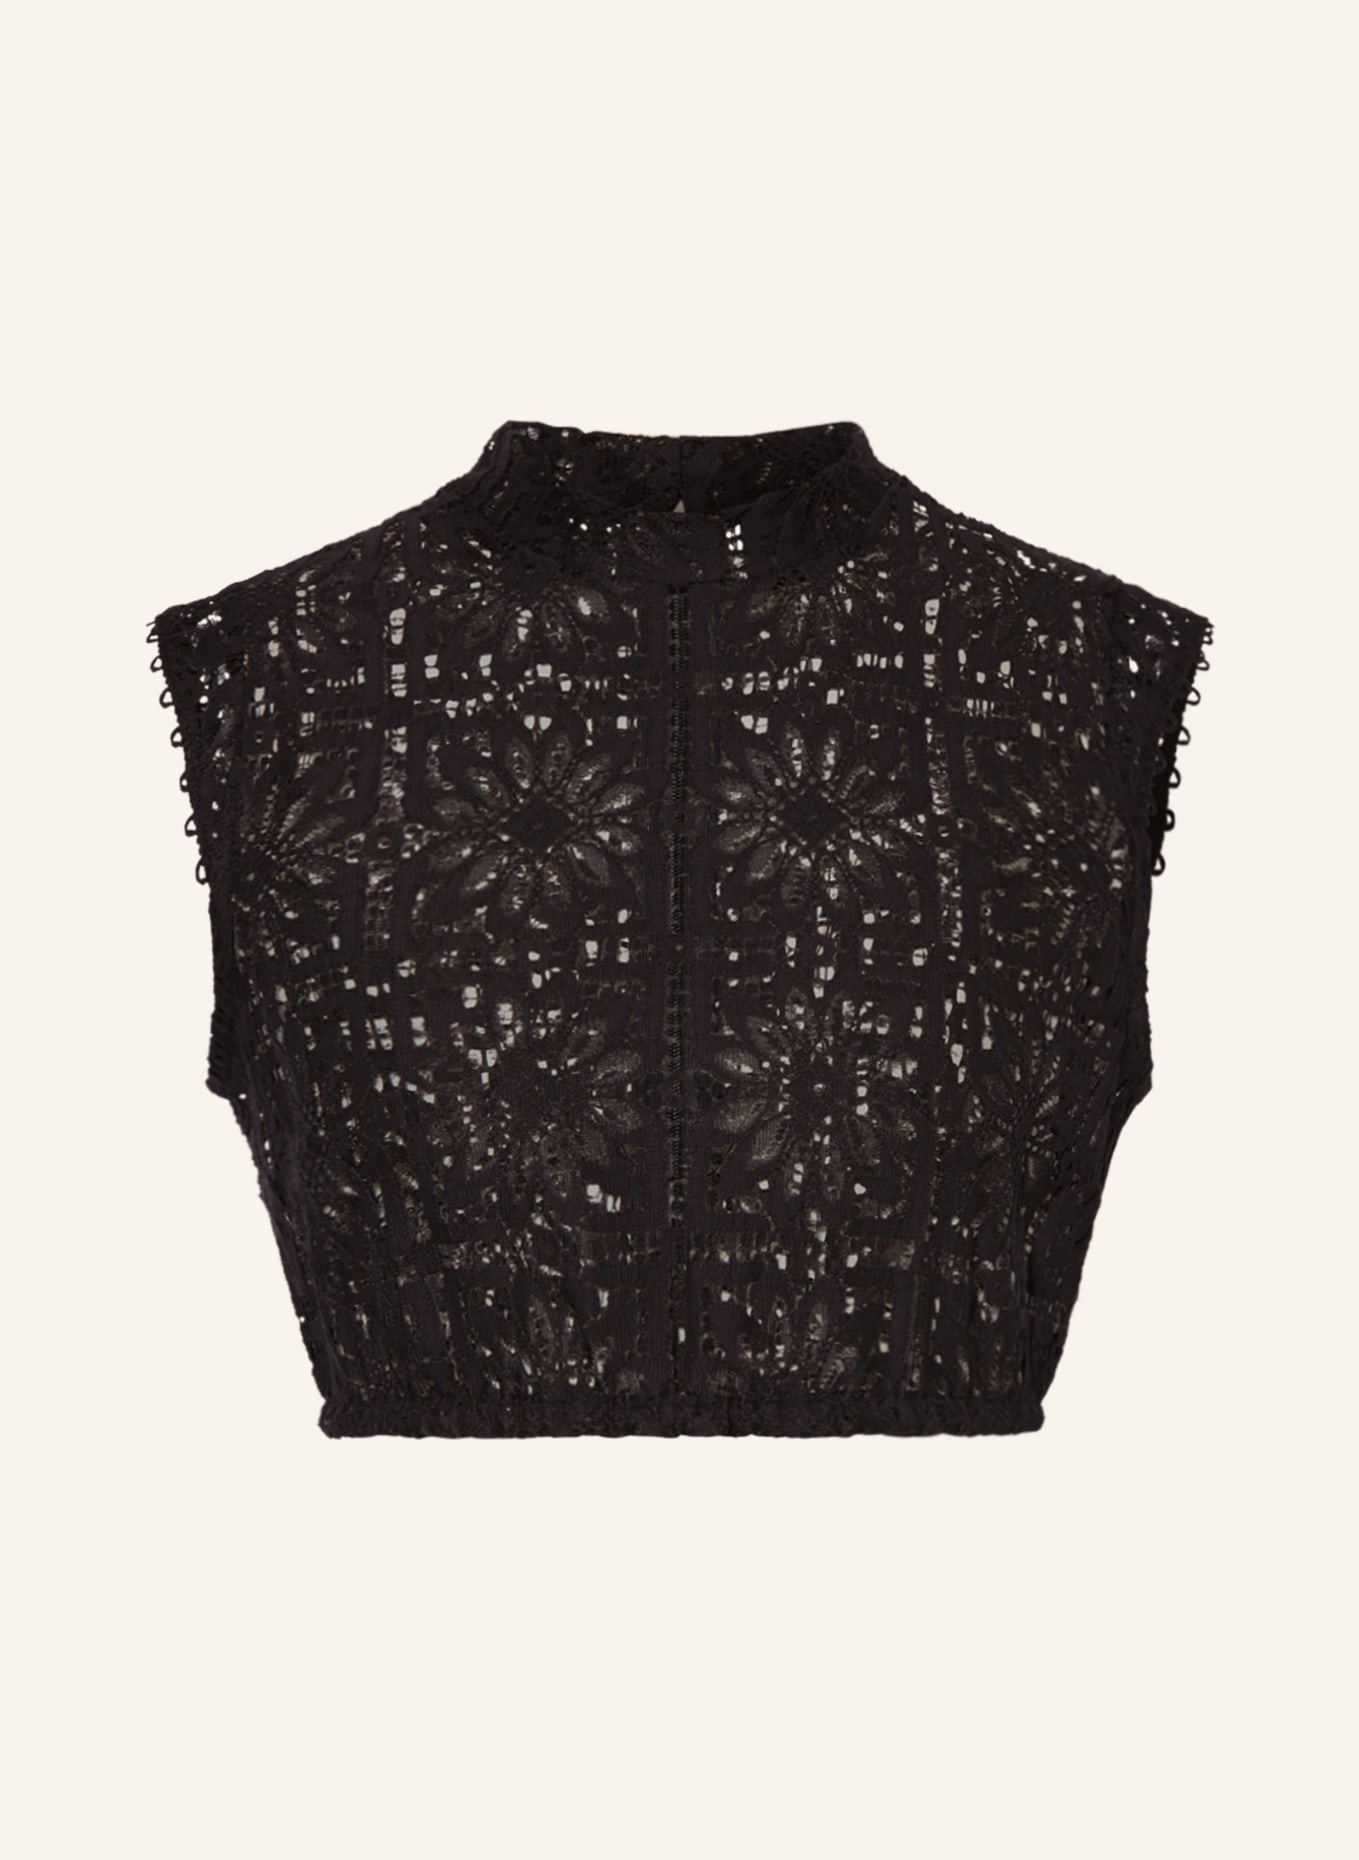 BOSS Dirndl blouse CARIN made of crochet lace, Color: BLACK (Image 1)